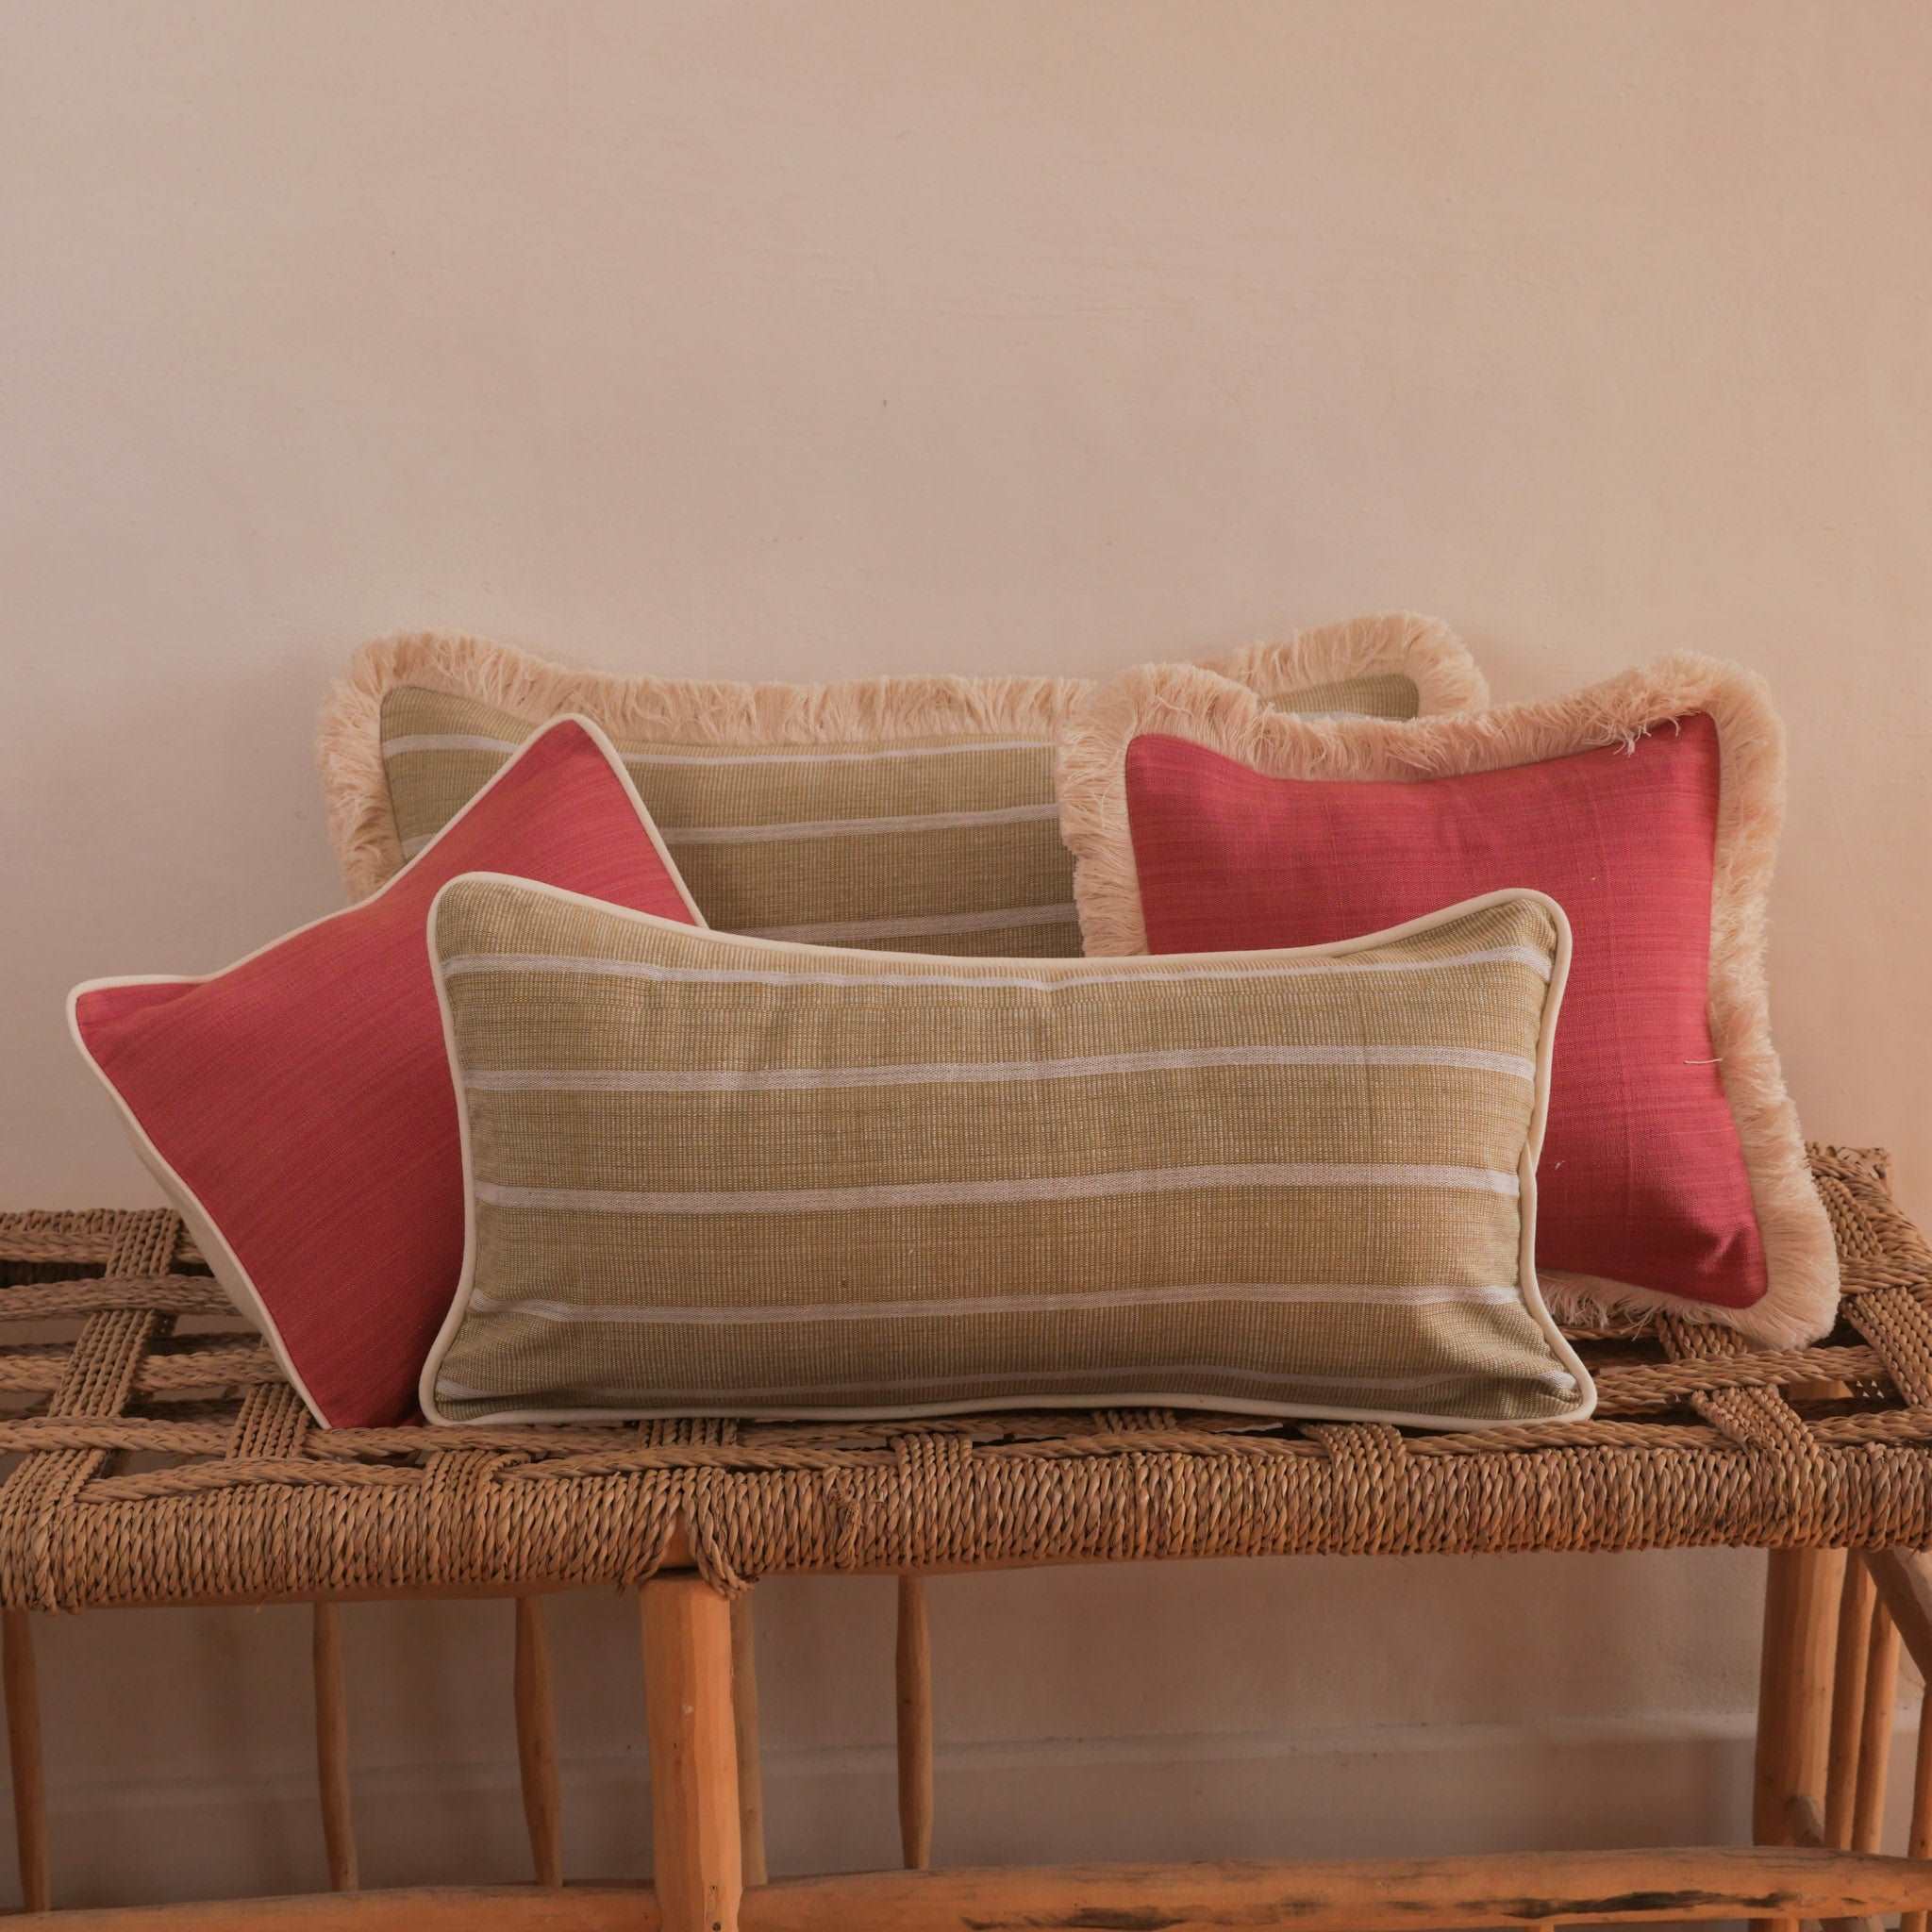 These luxurious cushions are handmade in Paris for Storie from a beautiful, thick, hand-woven cotton made near Ouagadougou in Burkina Faso. 